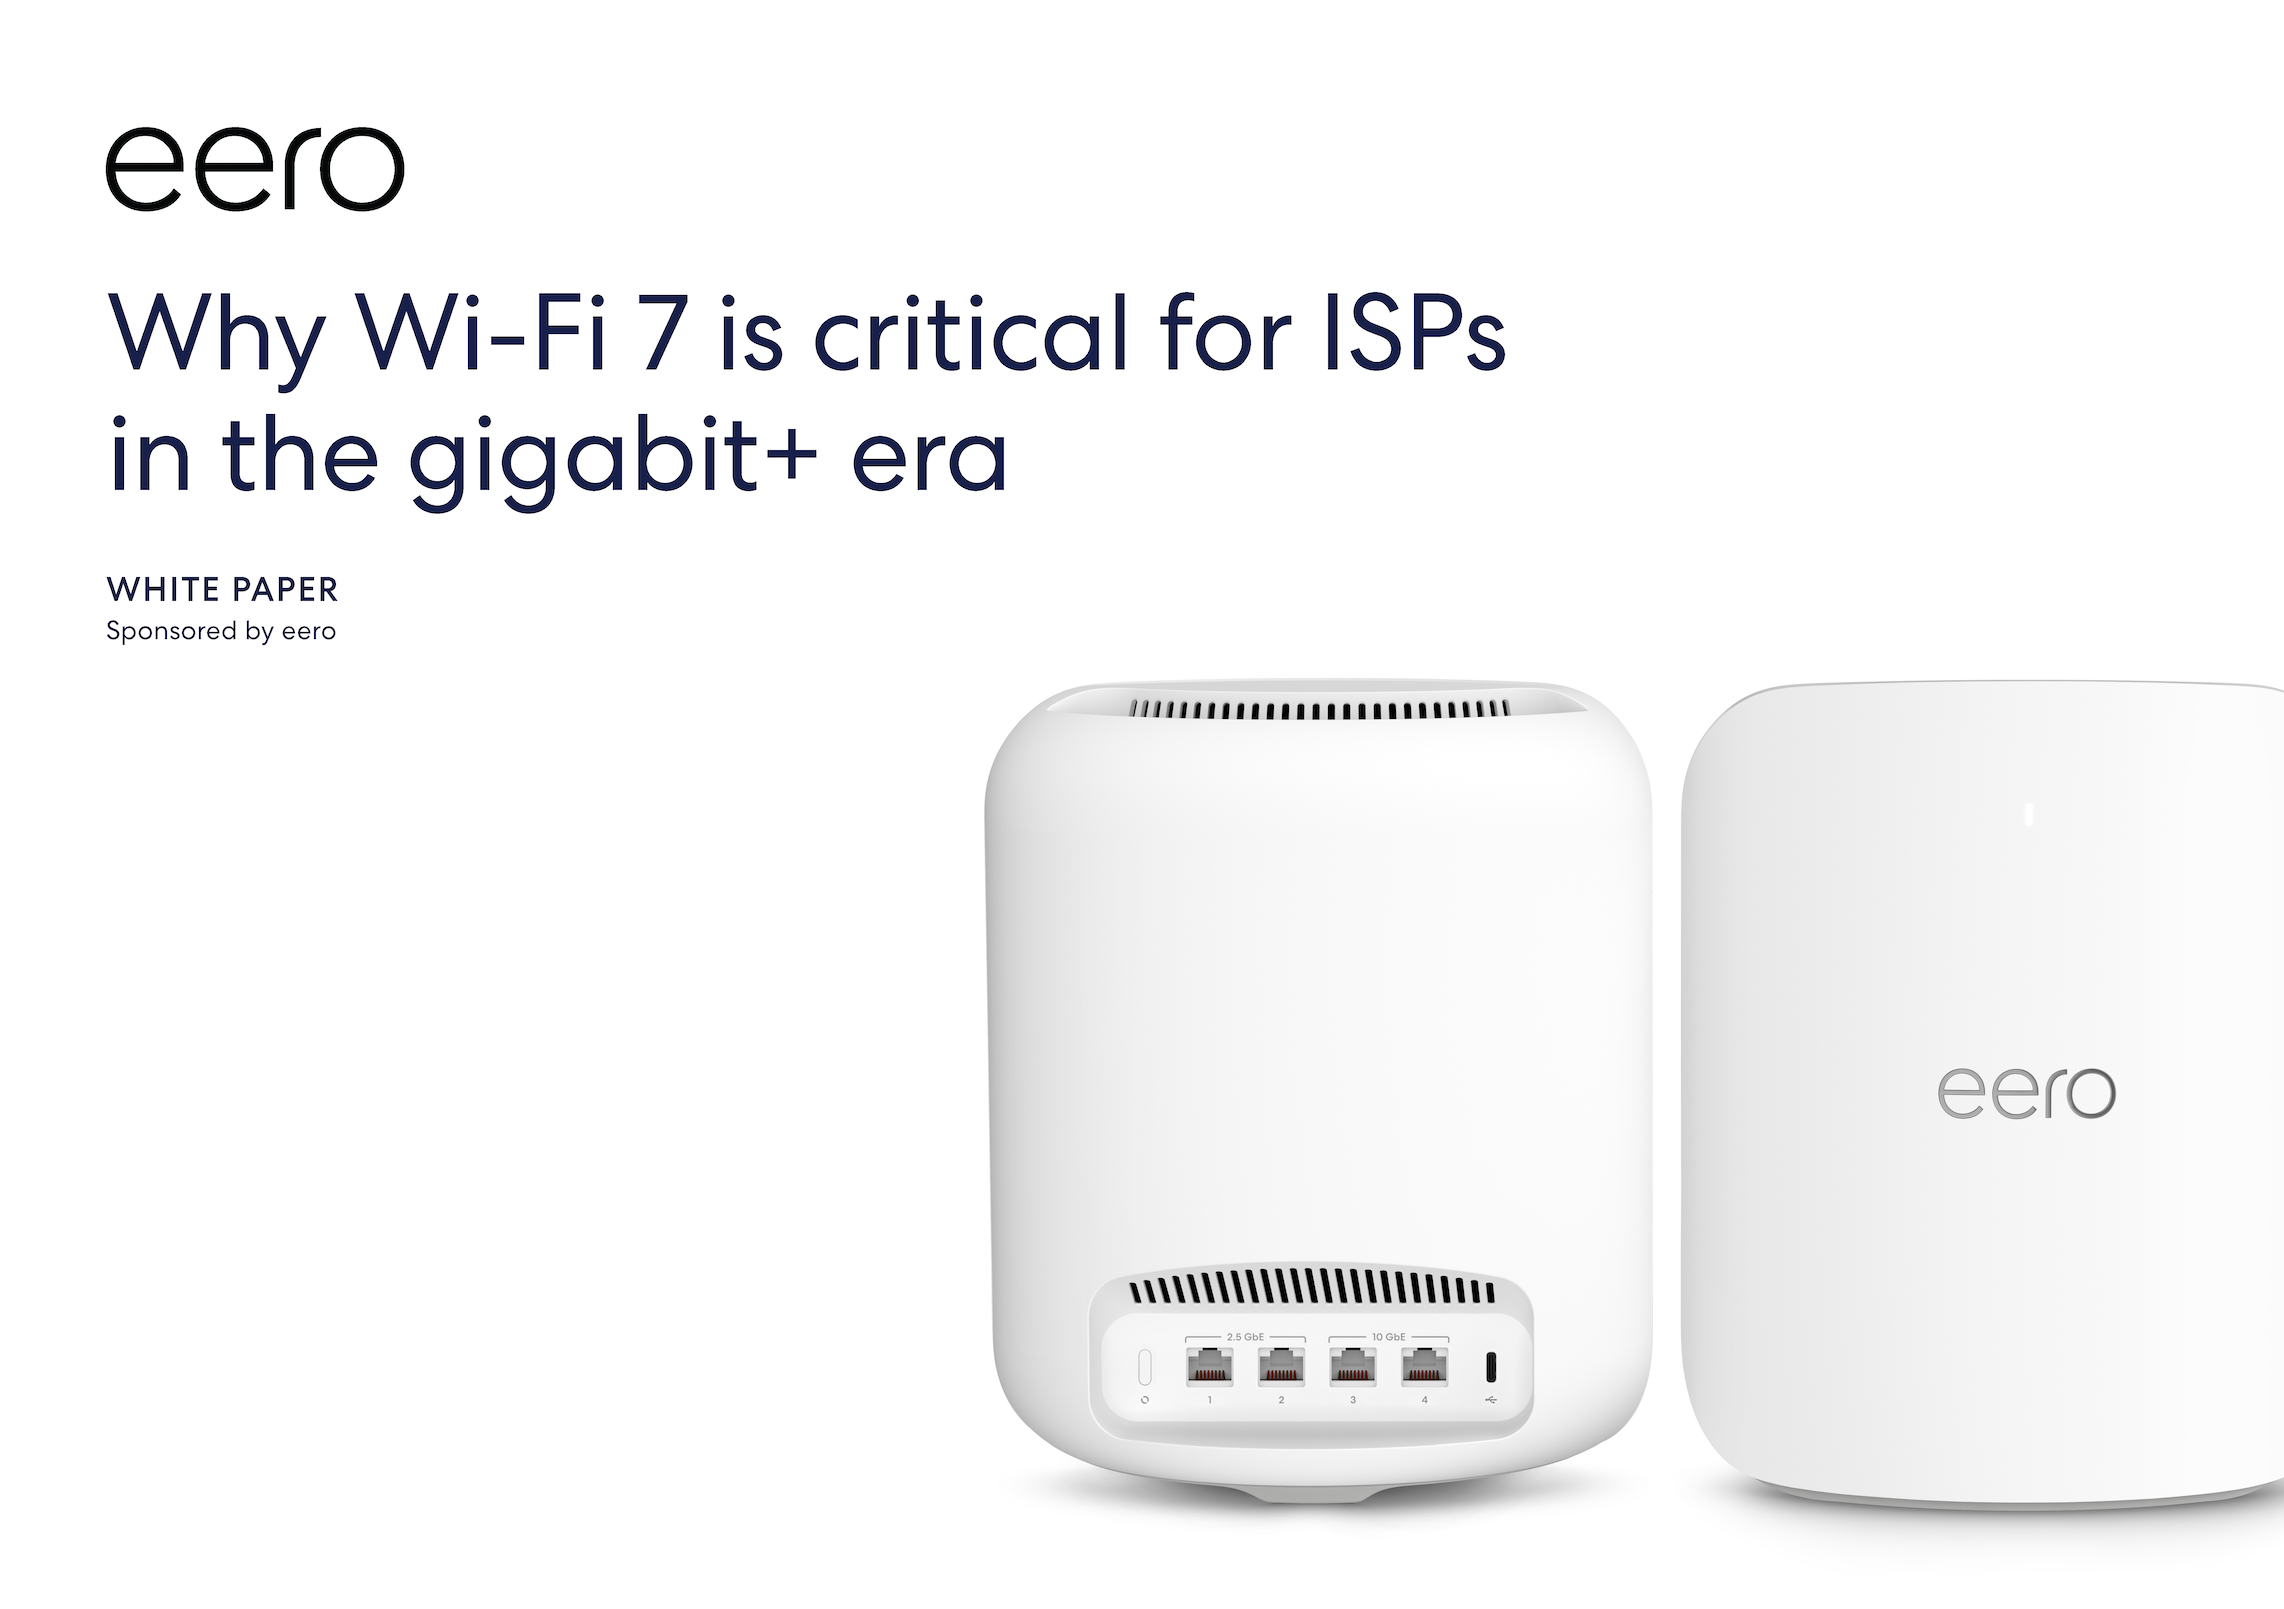 Why Wi-Fi 7 is critical for ISPs in the gigabit+ era